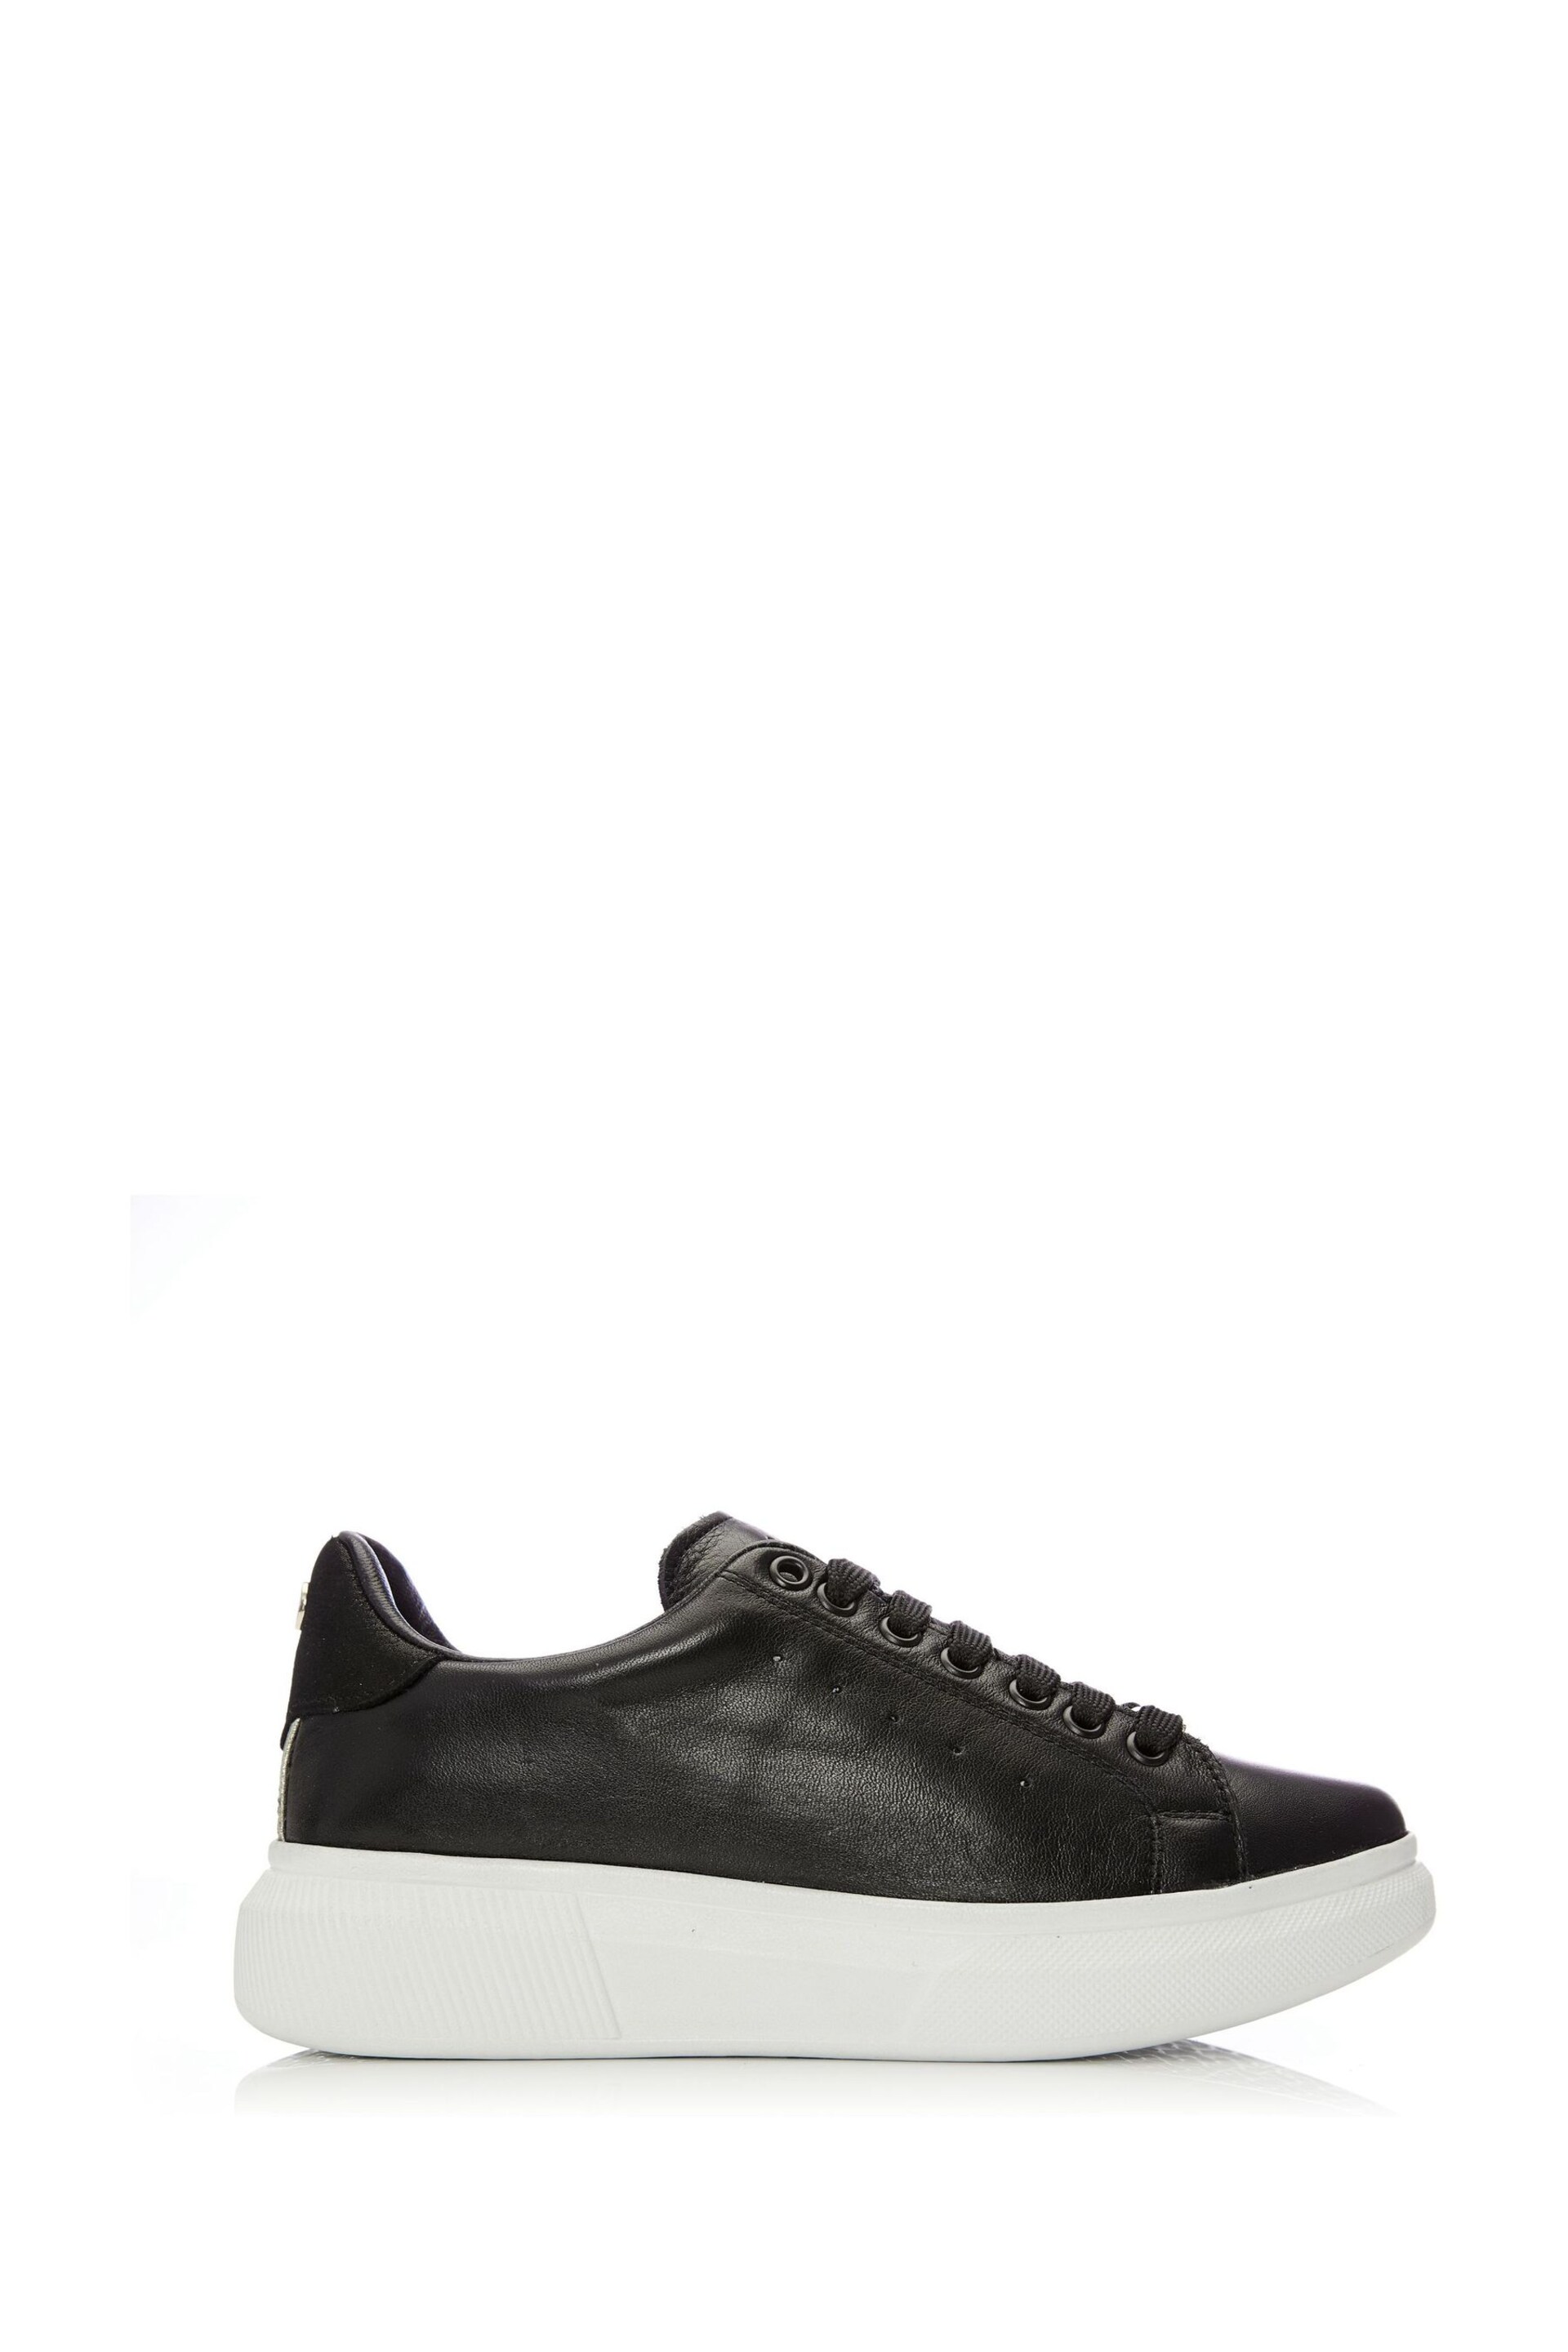 Moda in Pelle Bridgette Lace-Up Black Trainers With Slab Sole - Image 1 of 6